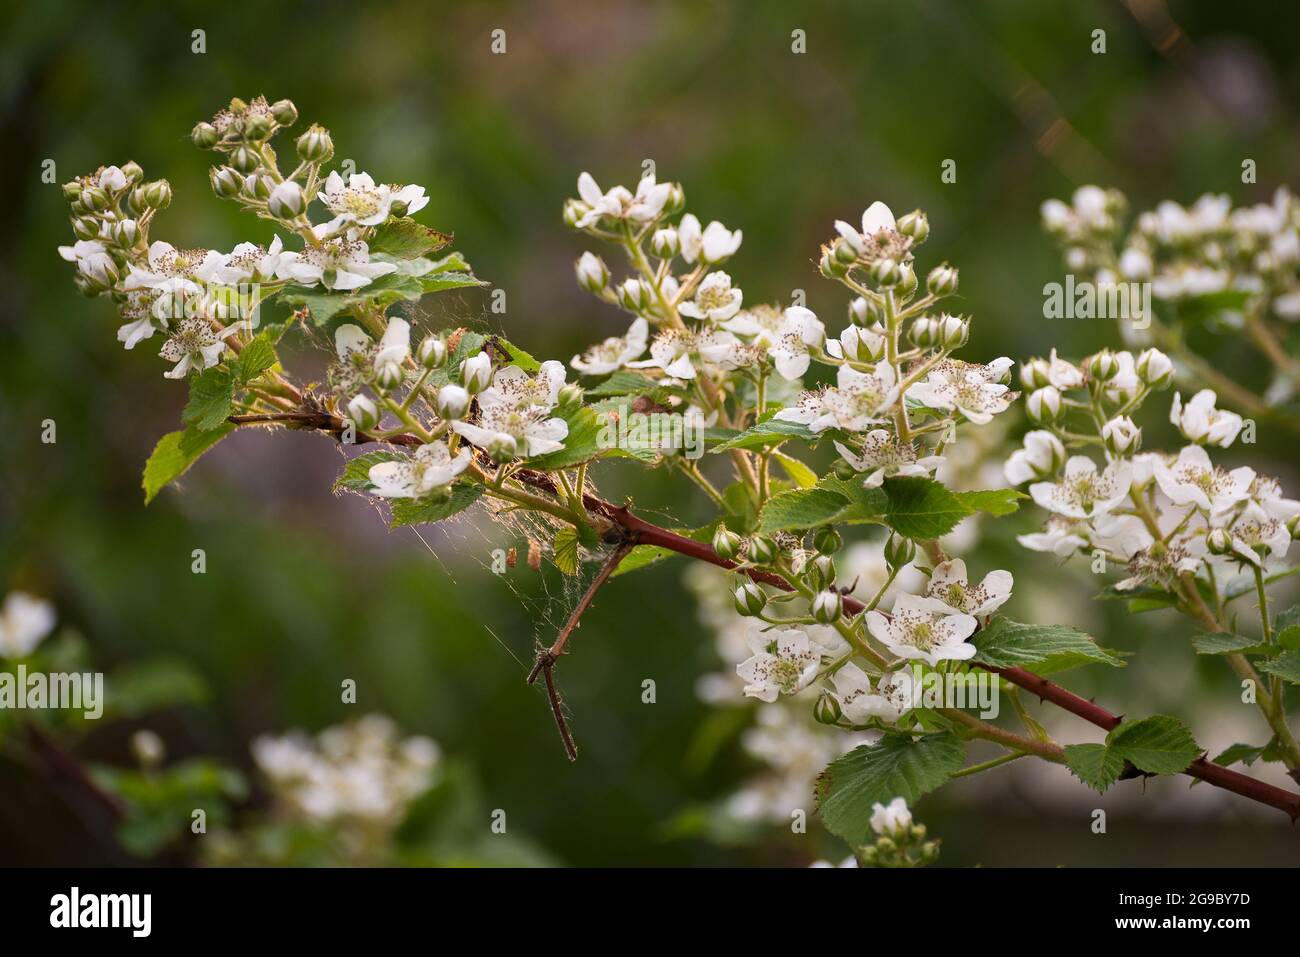 Blackberry branch with white flowers in the light of the setting sun Stock Photo